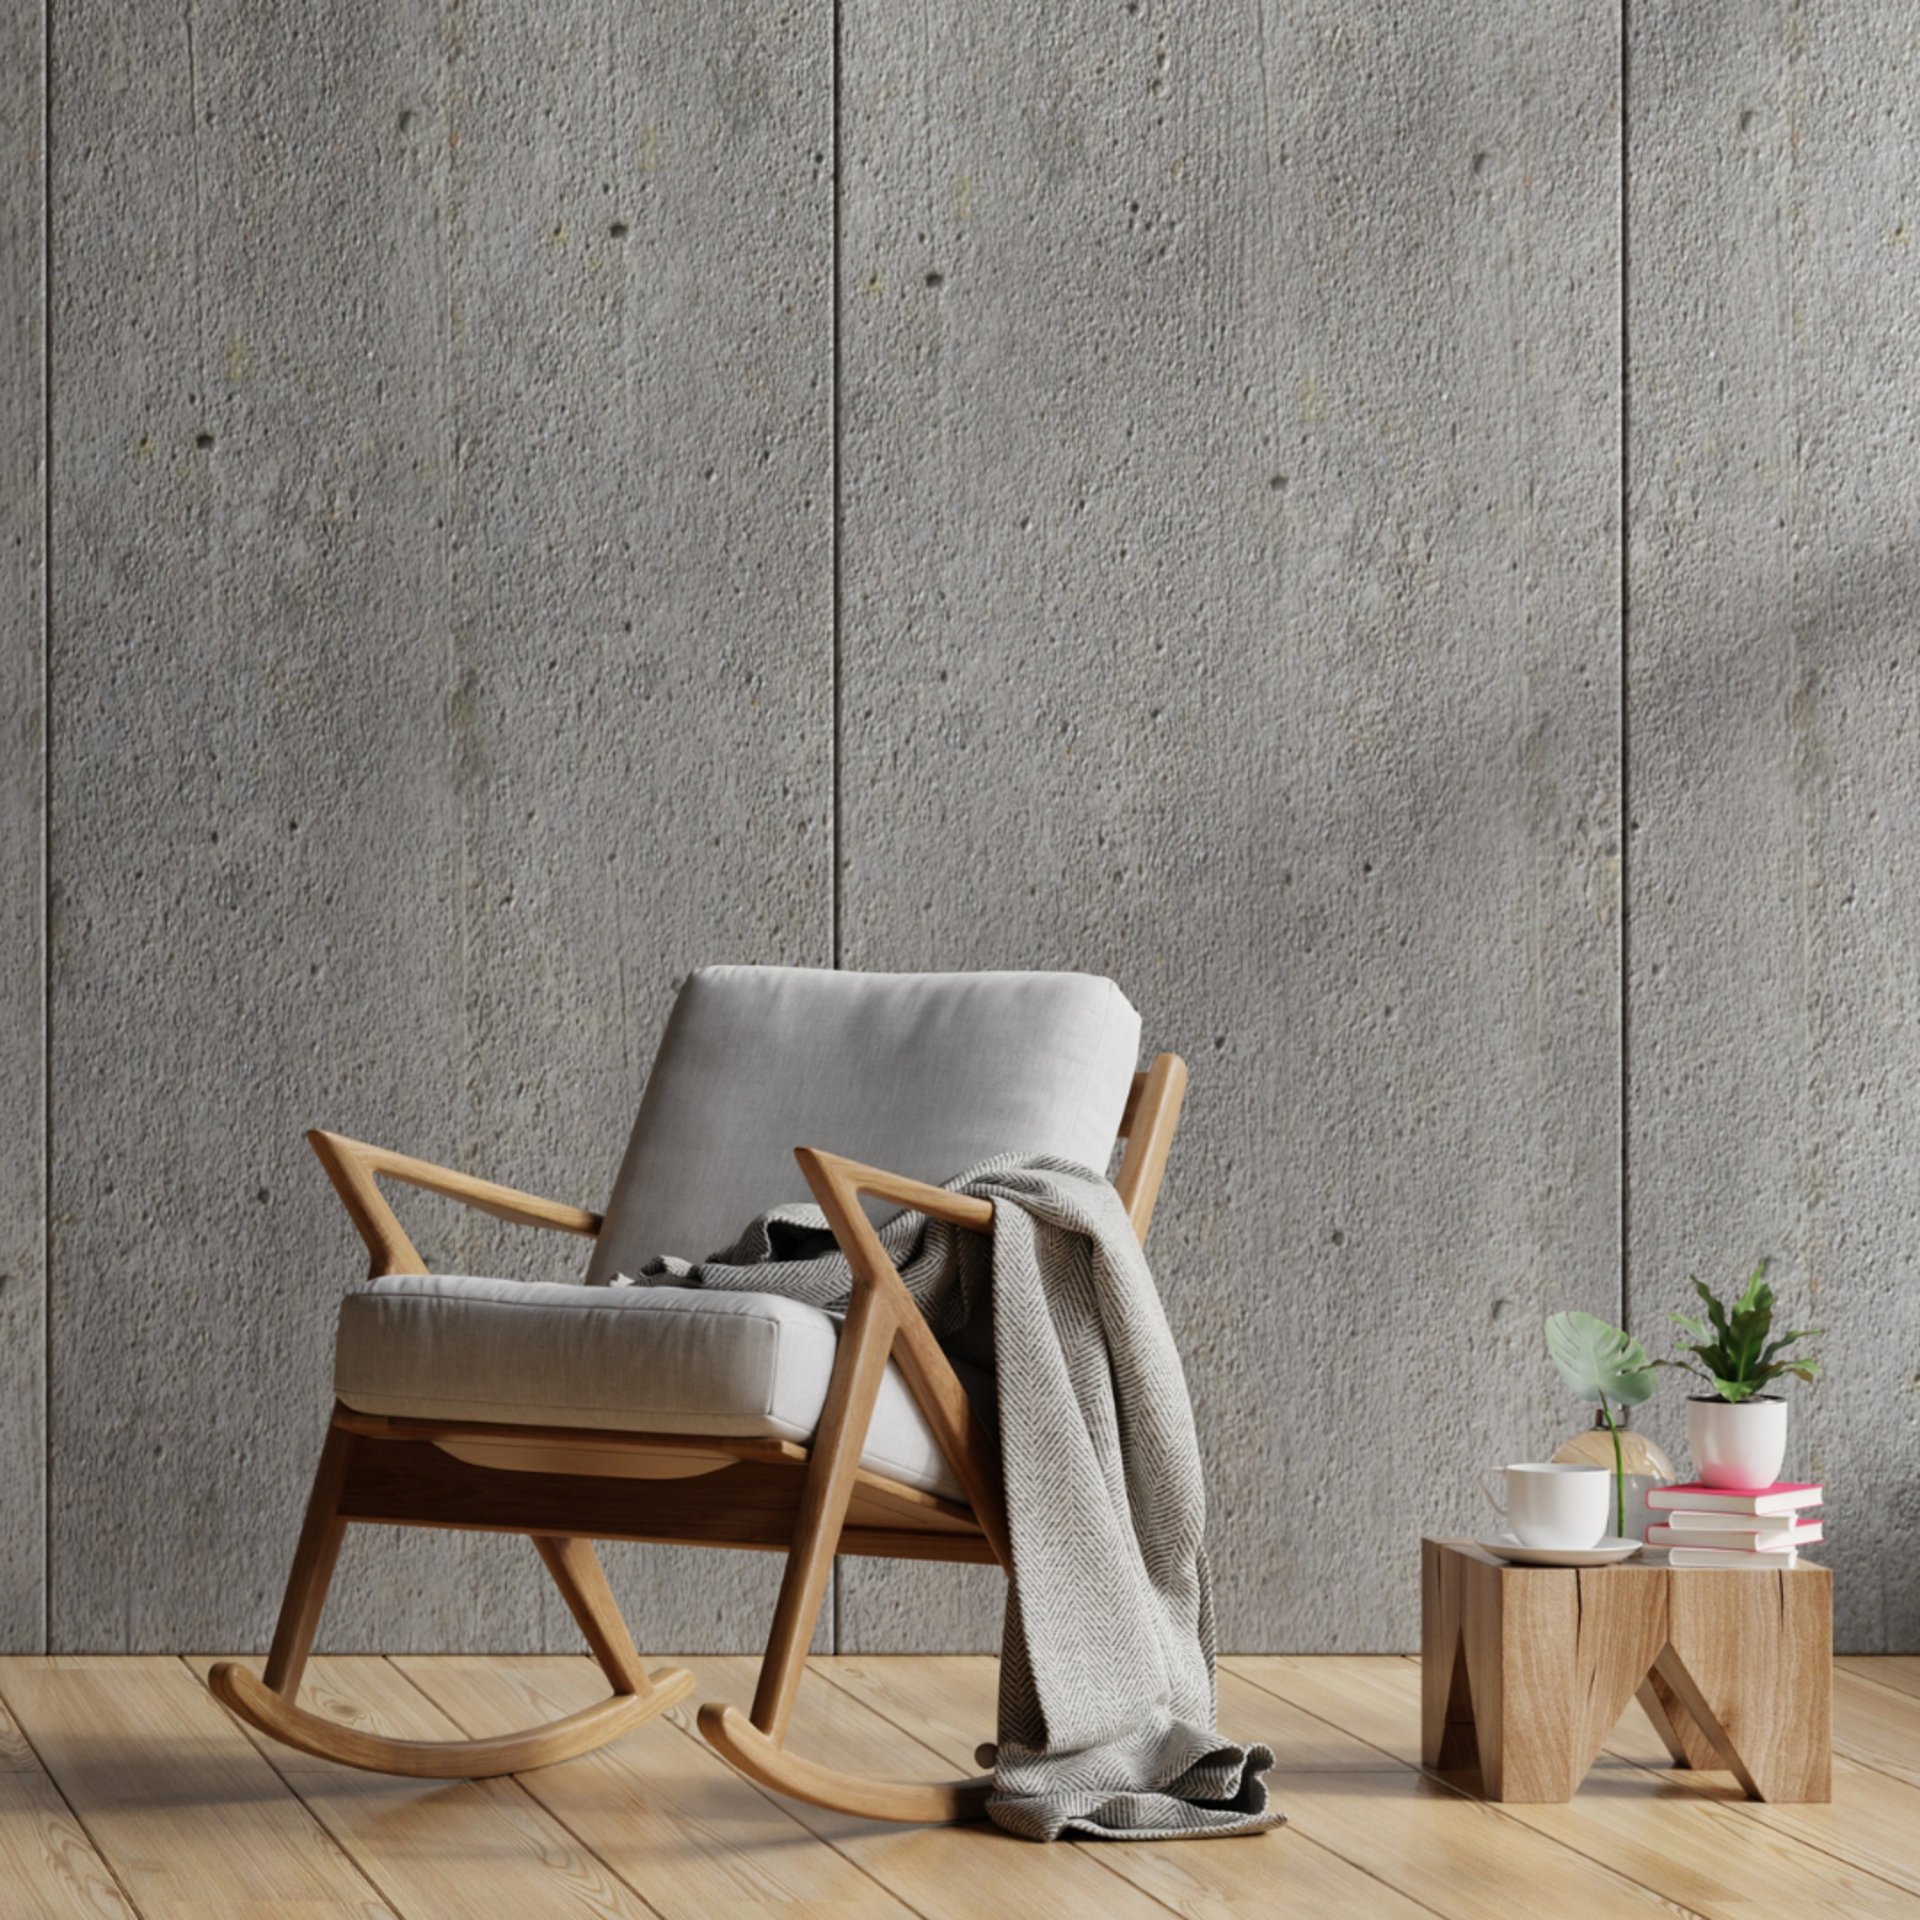 Grey chair in front of a grey textured wall